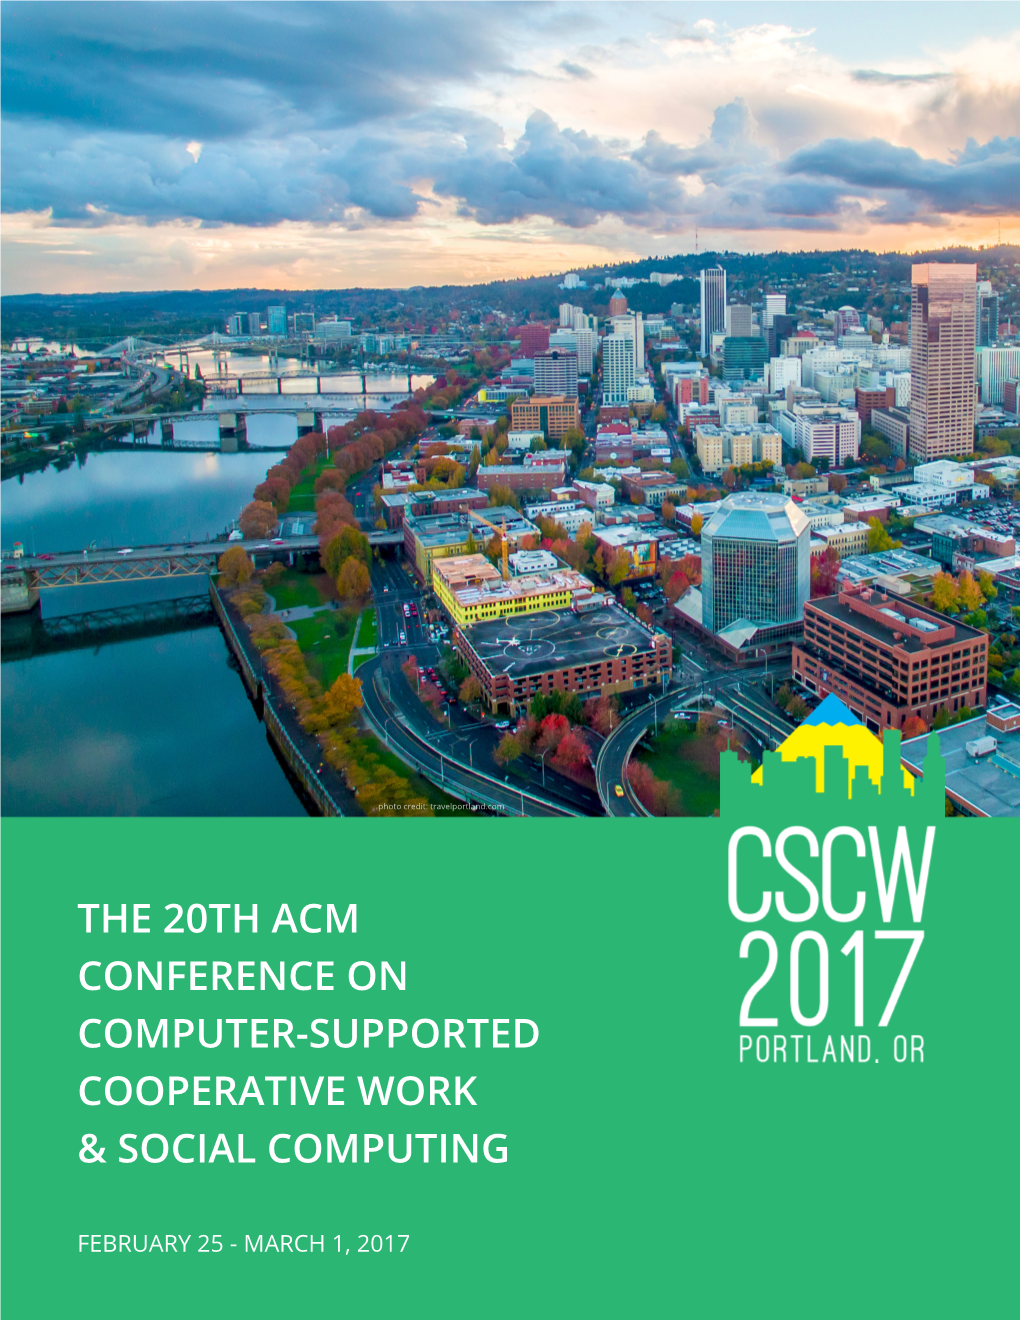 The 20Th Acm Conference on Computer-Supported Cooperative Work & Social Computing